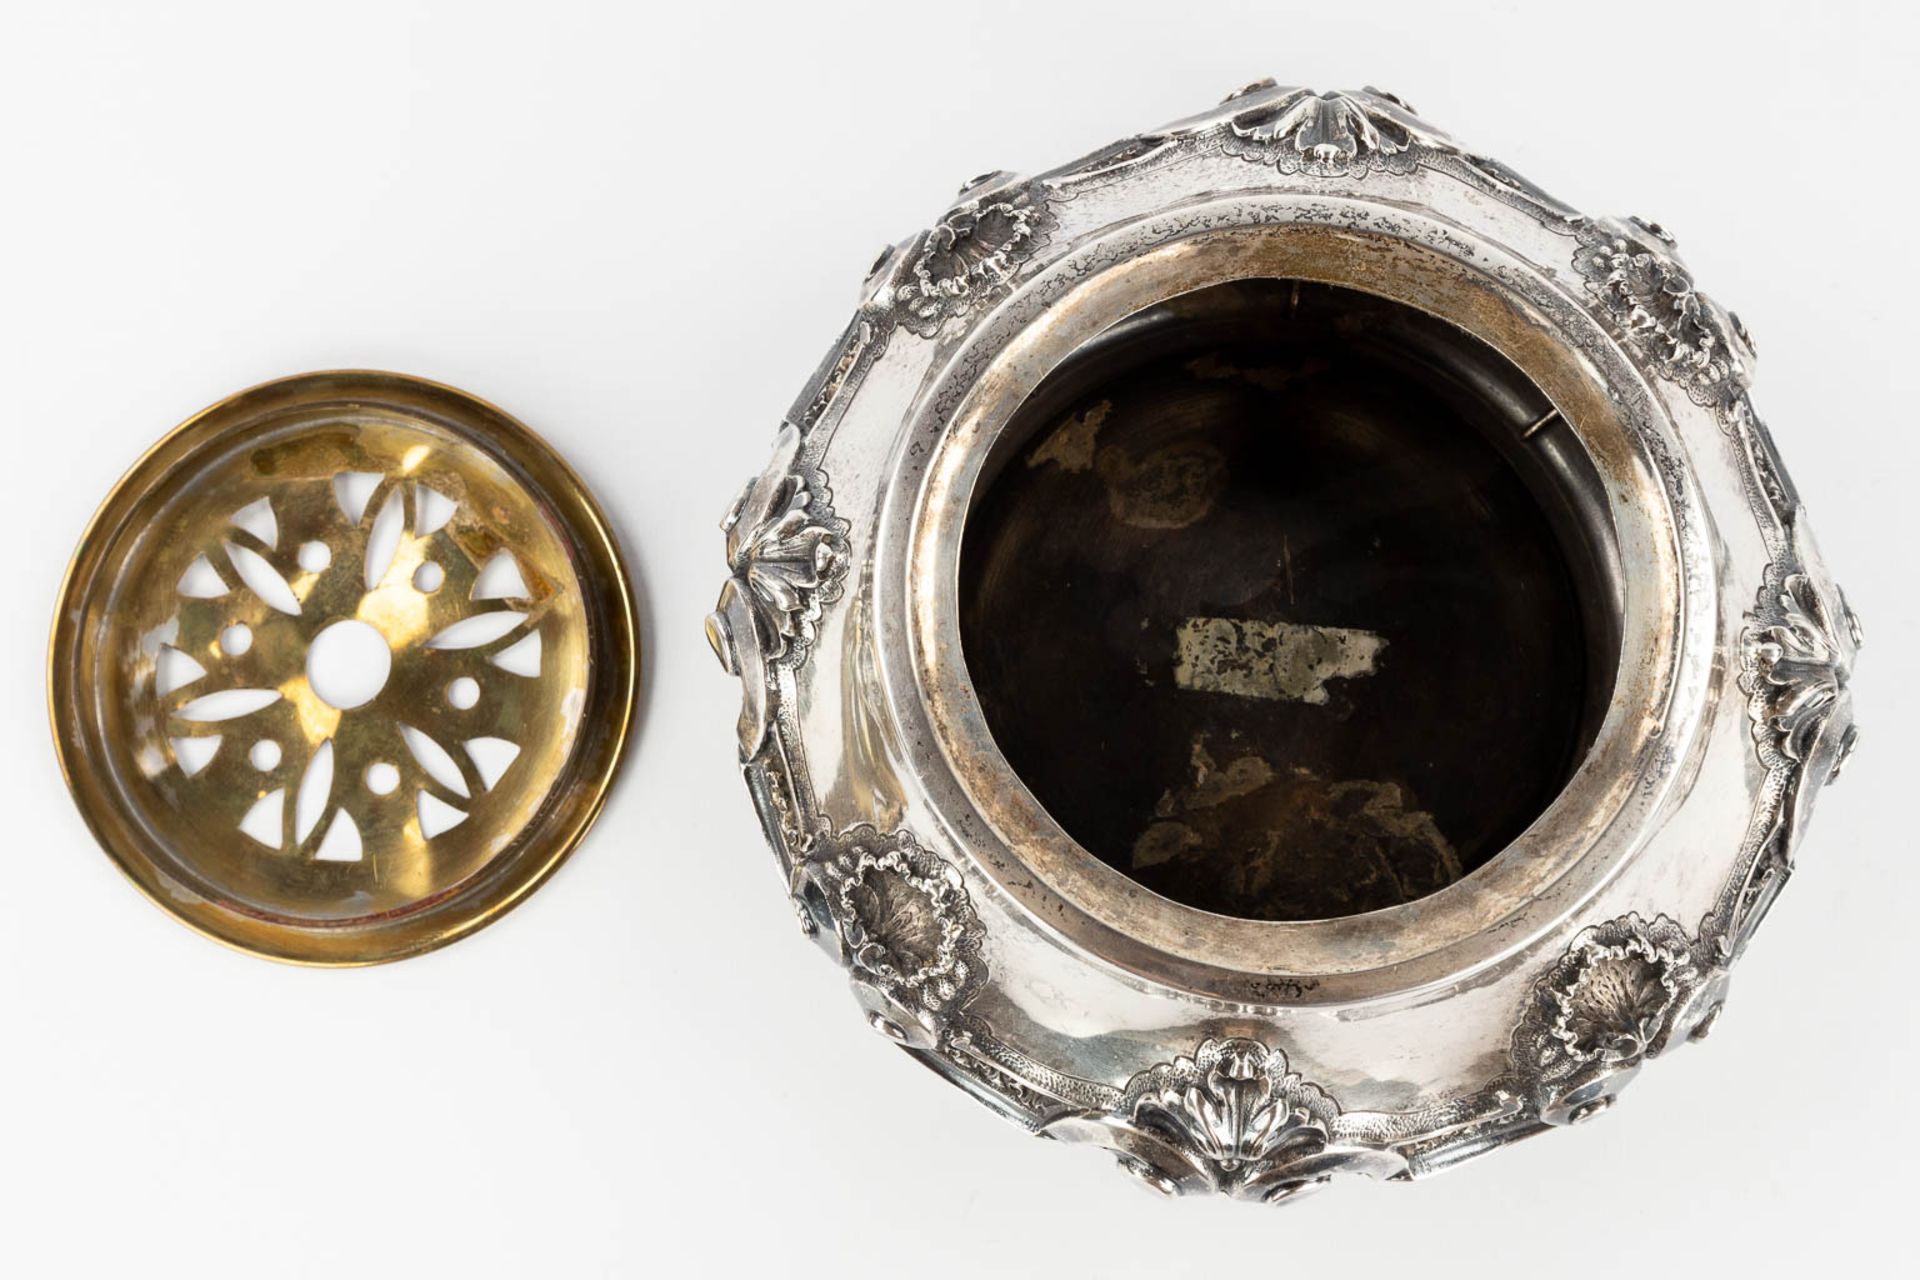 An antique incense burner made of silver, standing on a mirror.Ê20th C. (12,5 x 37cm) - Image 8 of 14